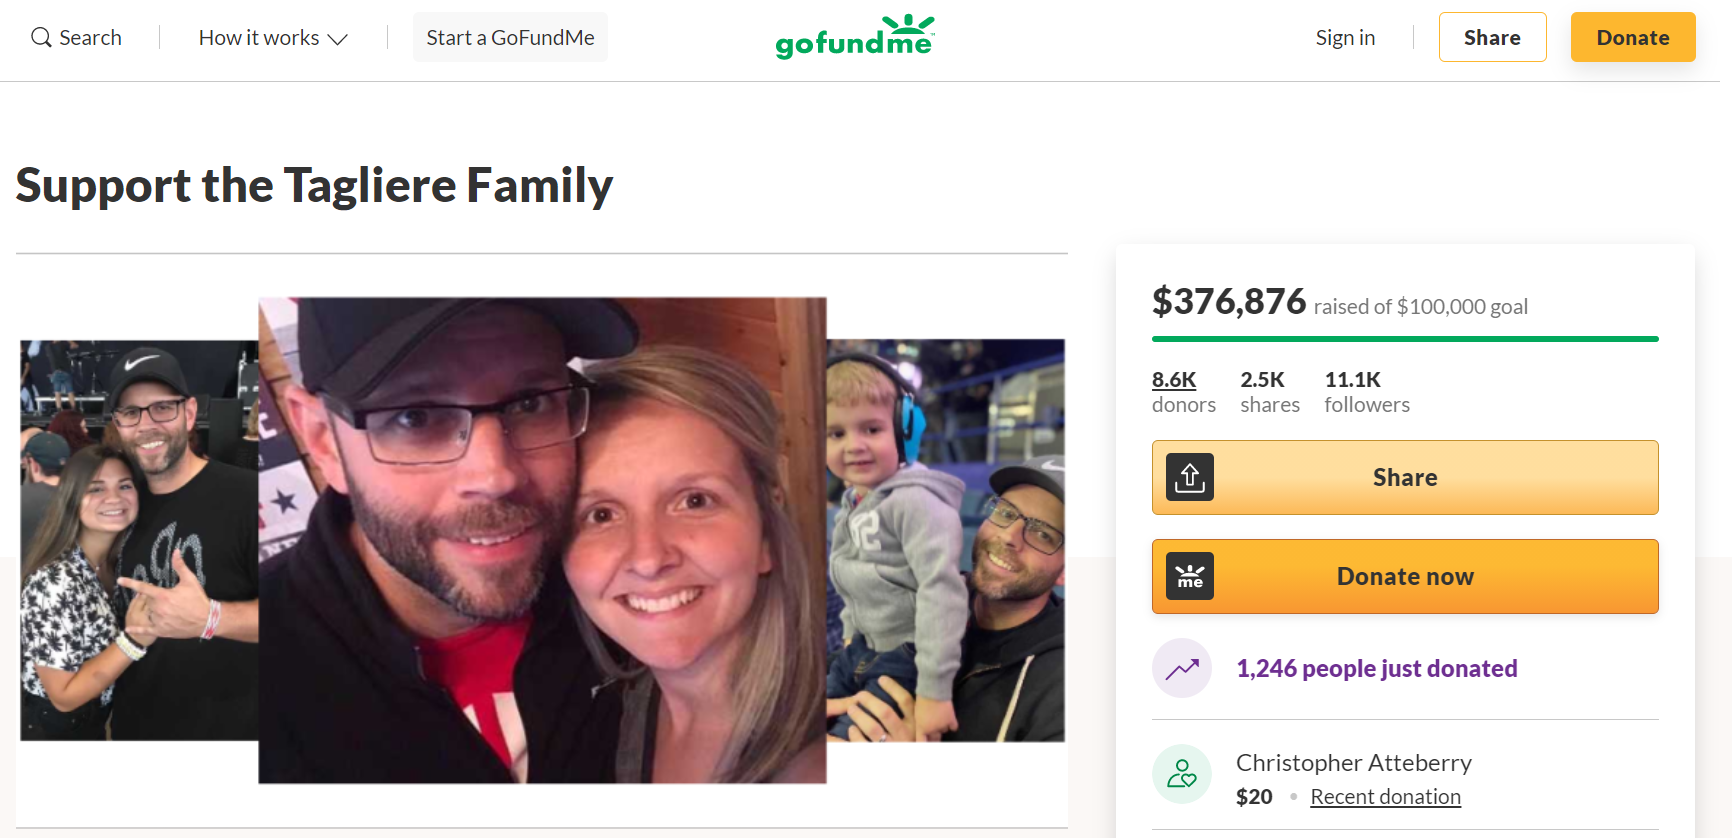 Take a look at this successful GoFundMe campaign.